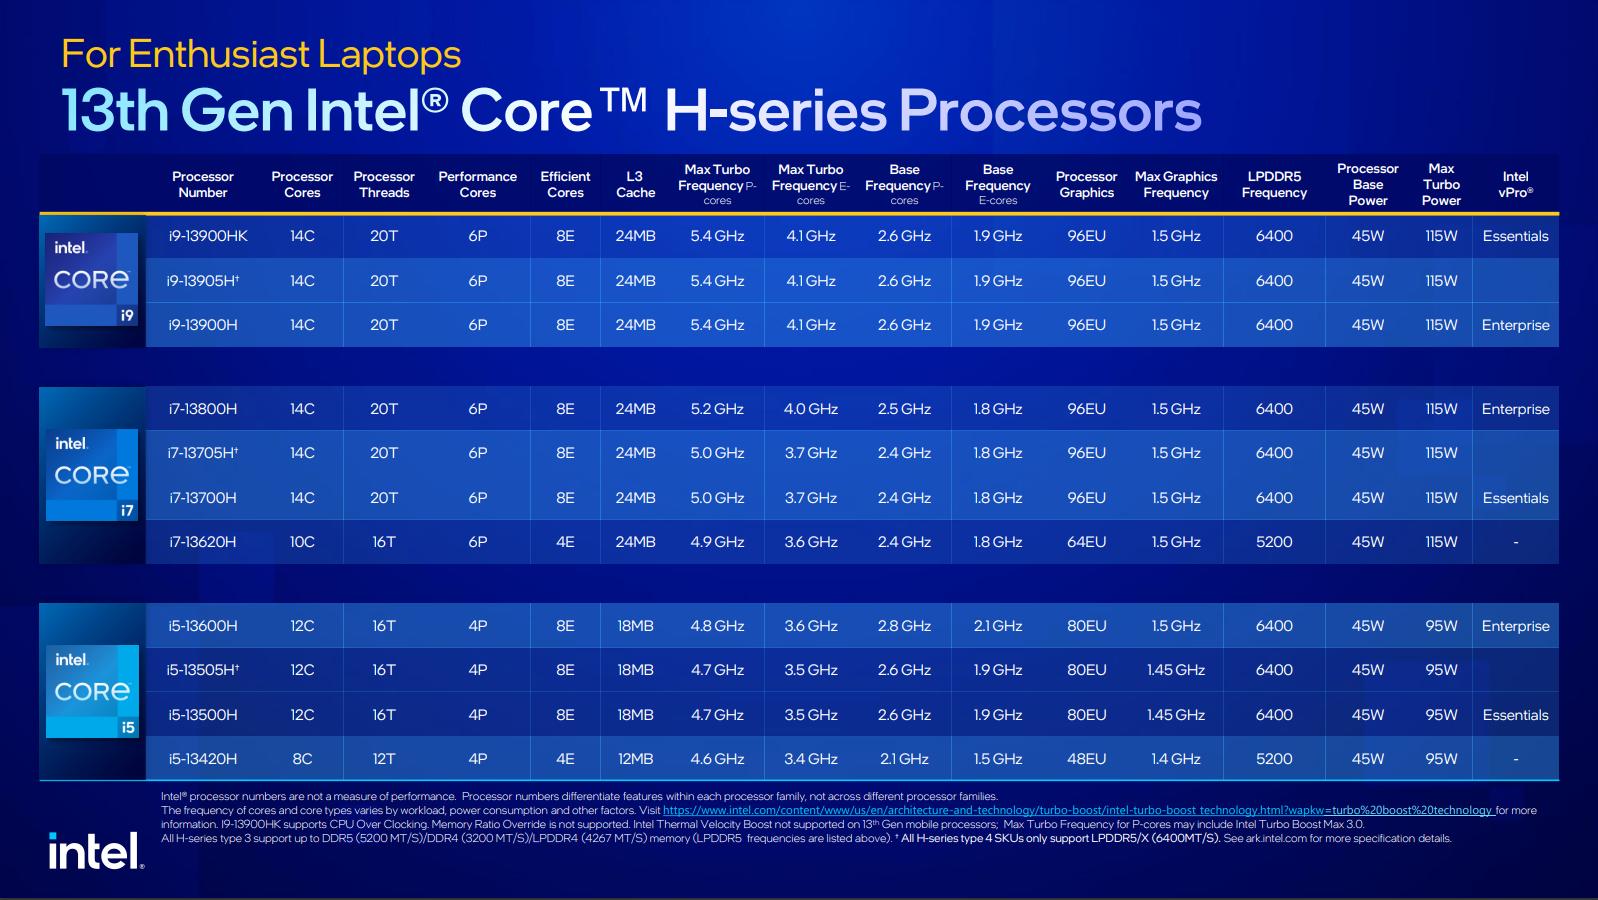 Intel introduced mobile Core processors of the 13th generation